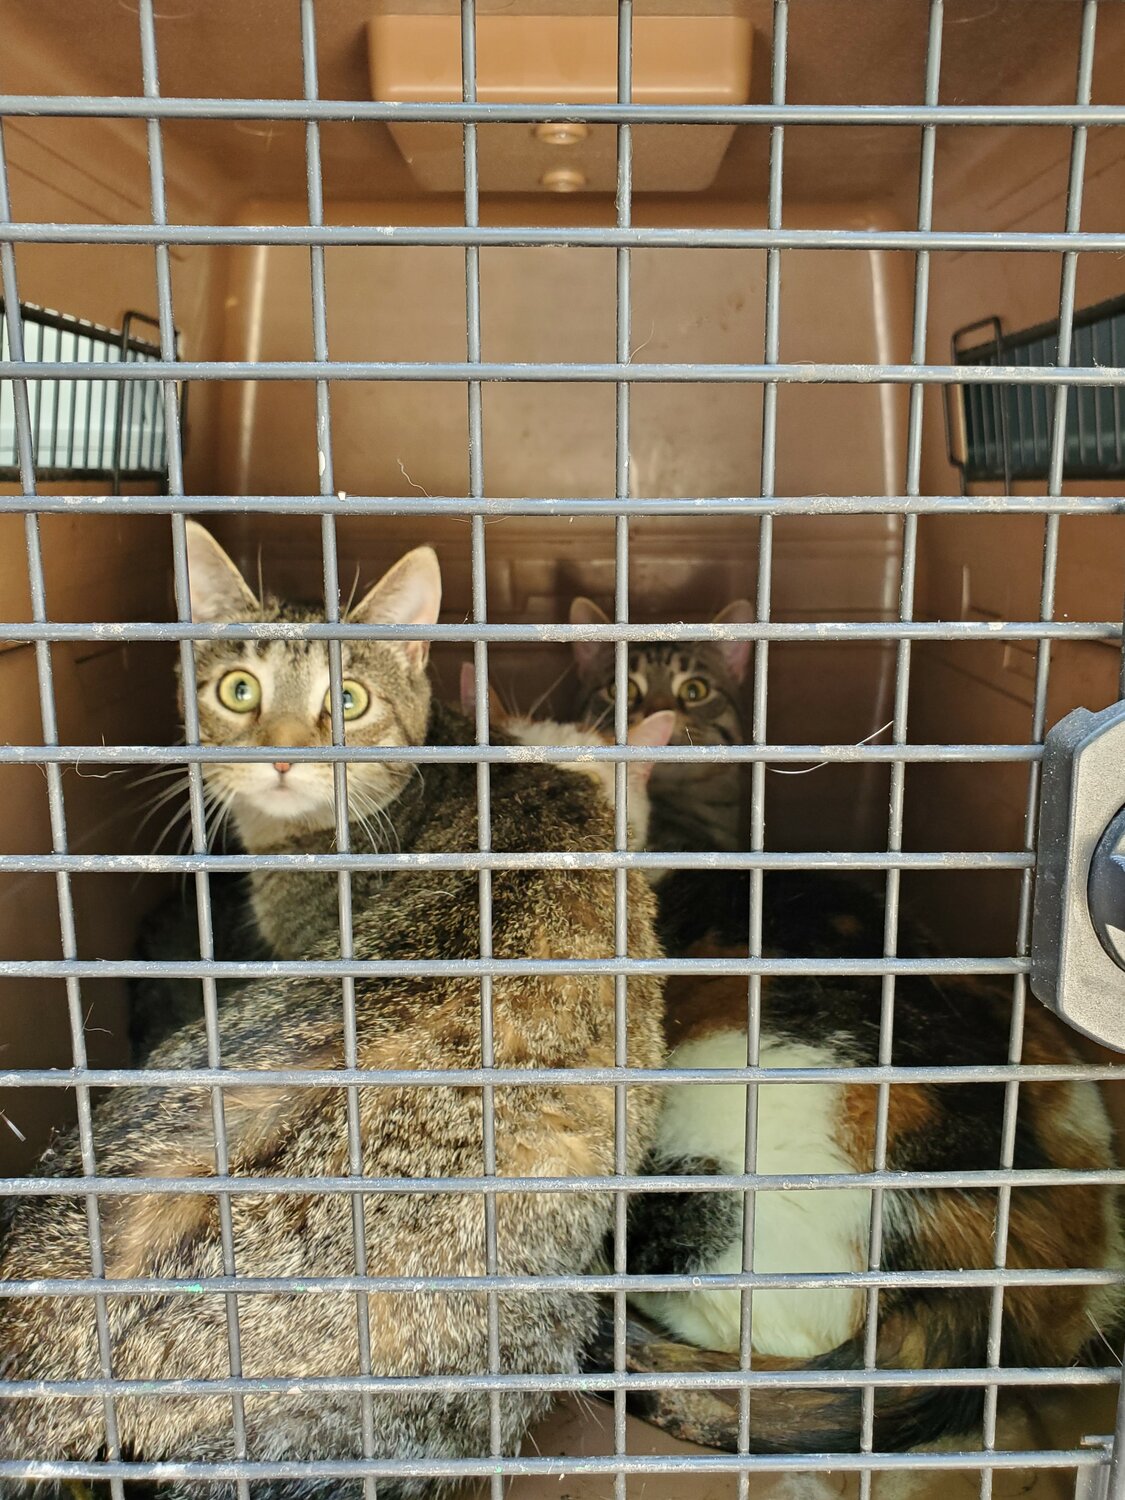 Some of the 33 cats rescued from a hotel room in Feasterville-Trevose by the Bucks County SPCA, along with three dogs.